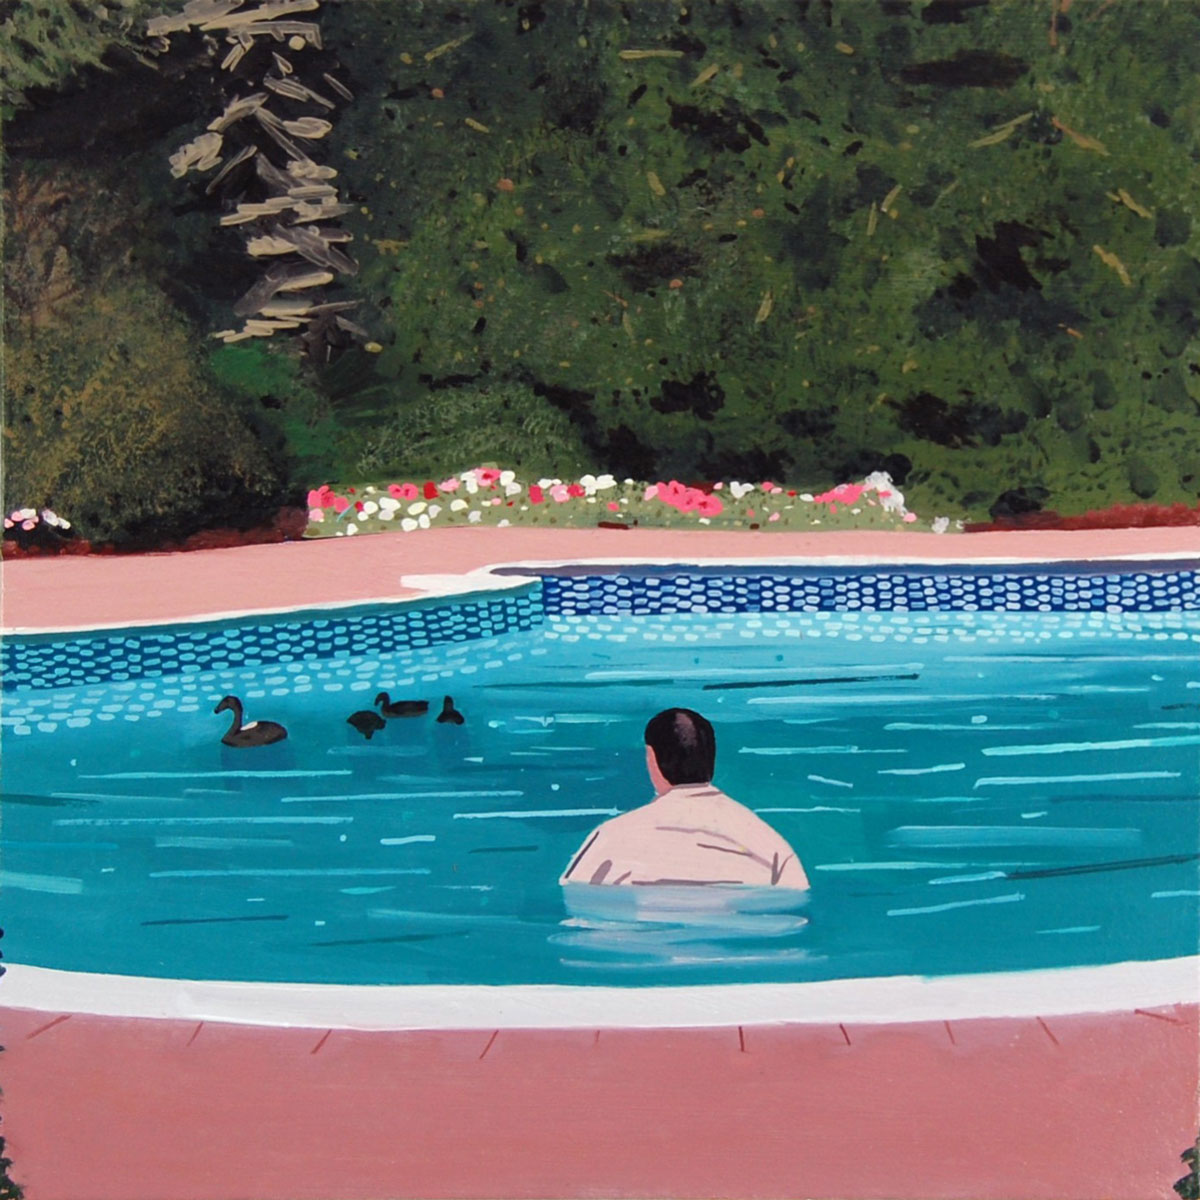 Back view of a man floating in a swimming pool watching a group of ducks swim by